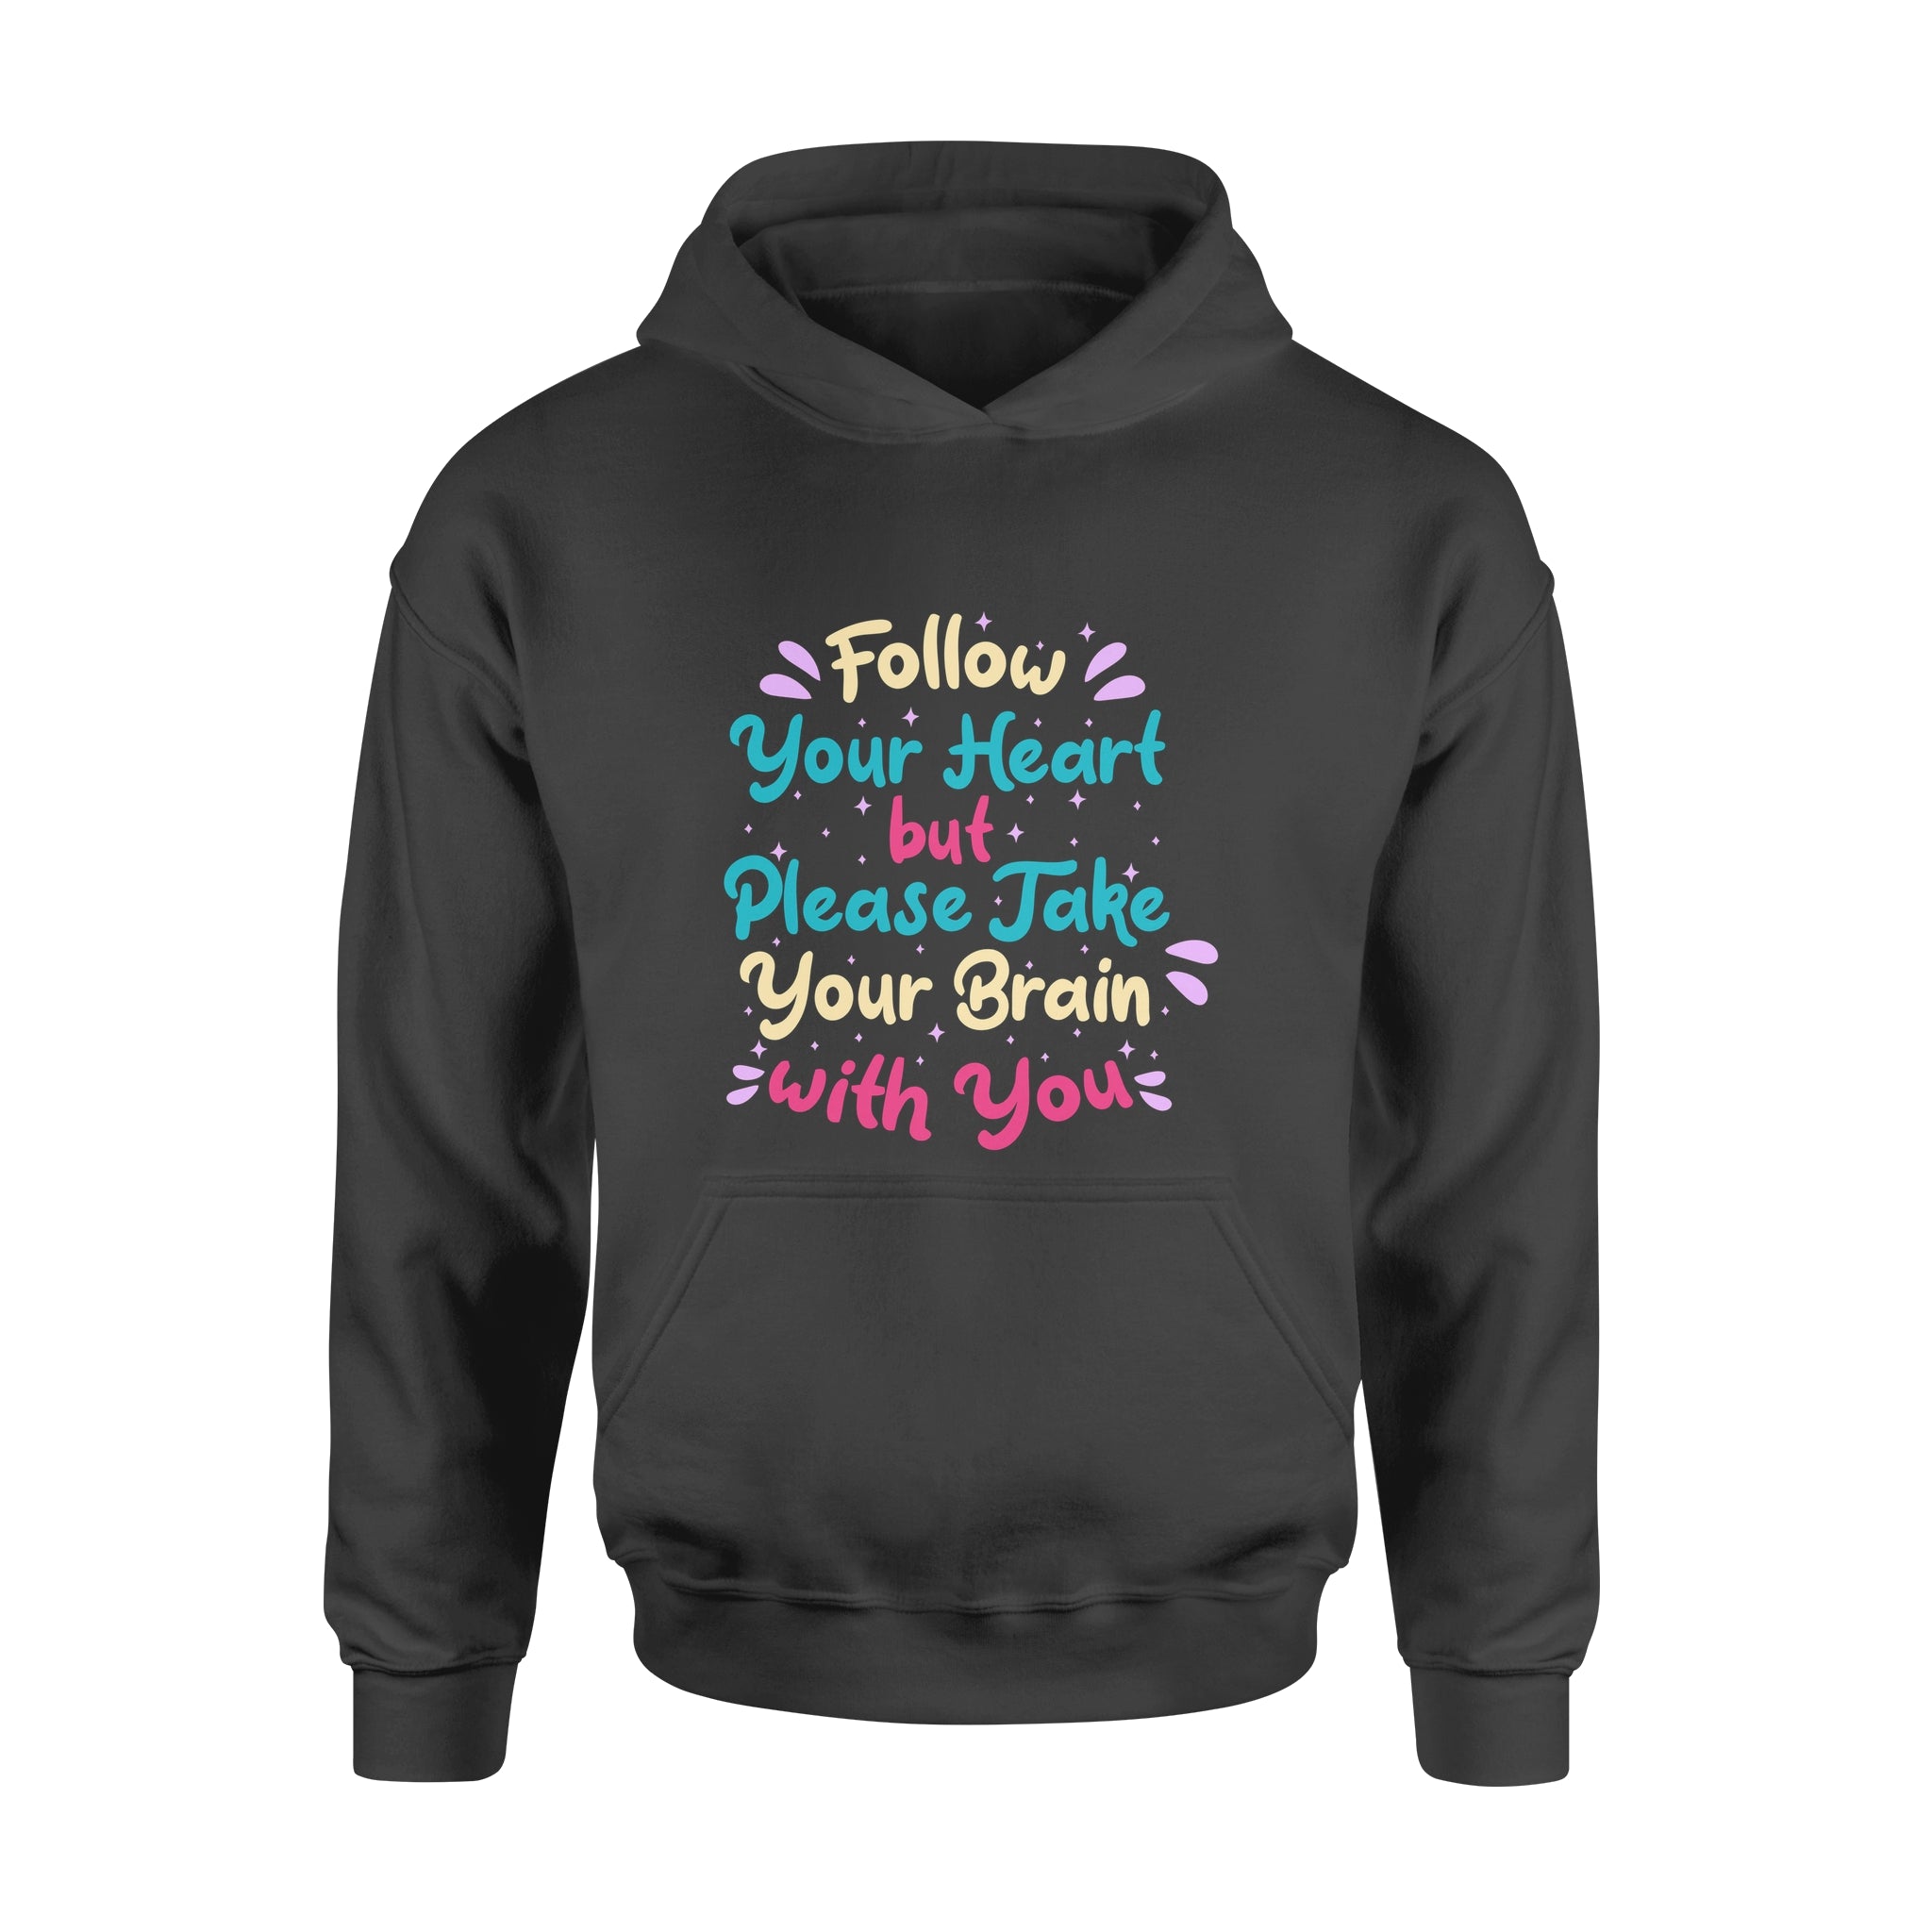 Follow You Heart but Please Take Your Brain with You - Hoodie